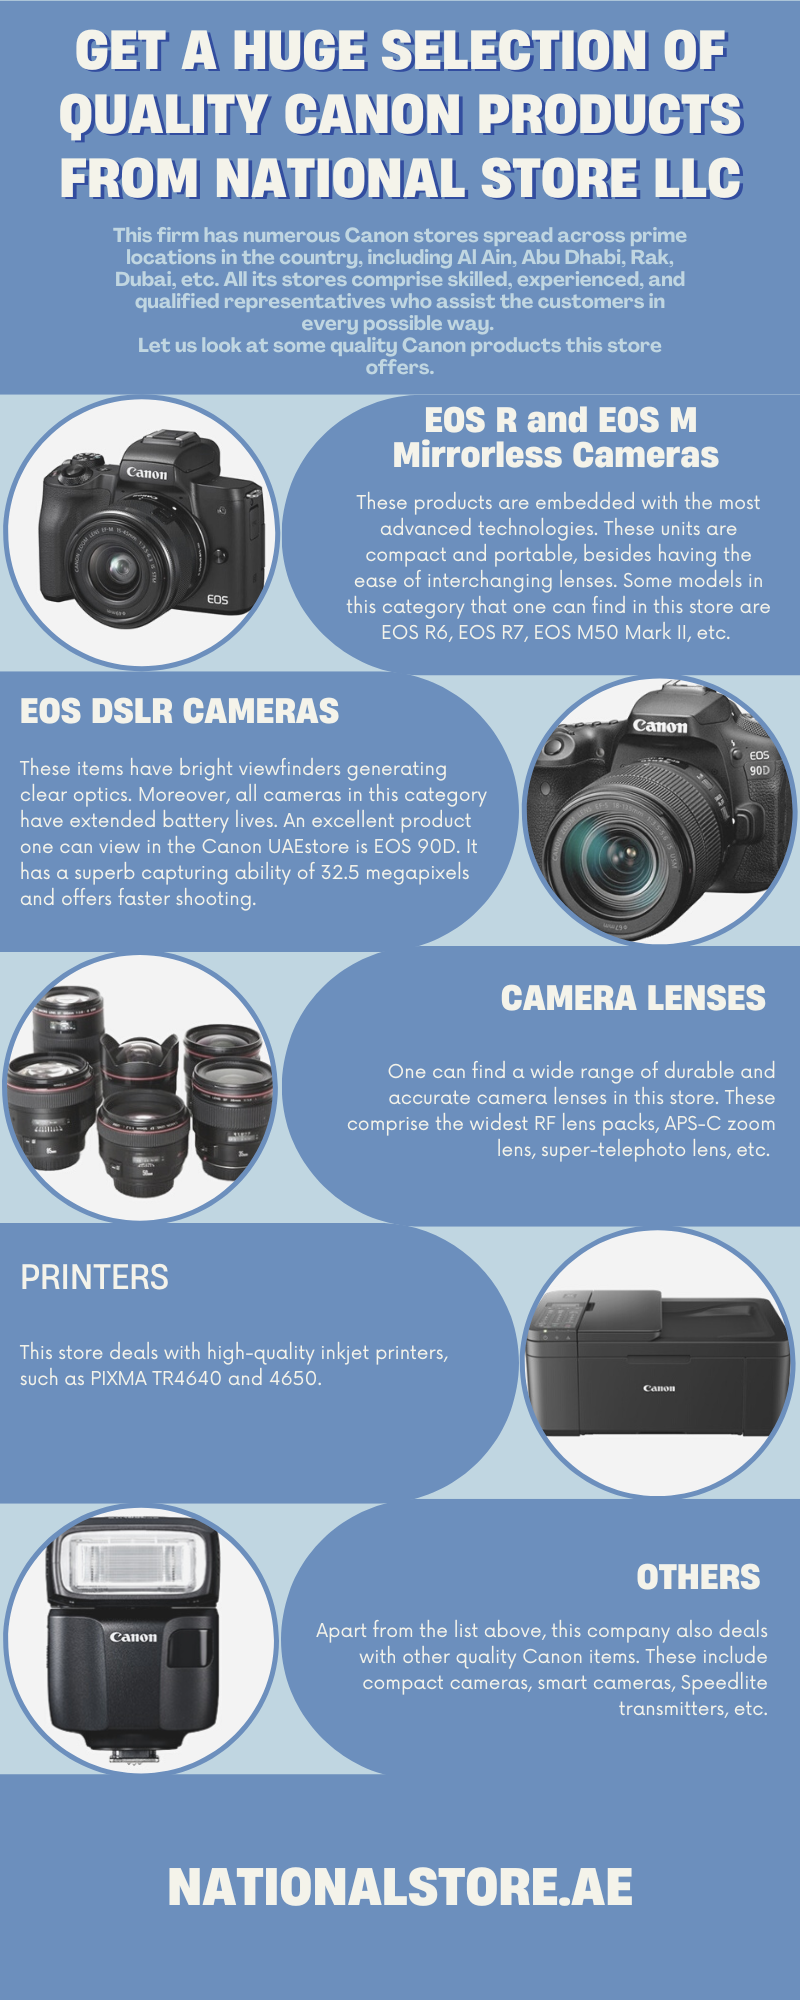 Get A Huge Selection of Quality Canon Products from National Store LLC The discussion or planning regarding digital imaging products is incomplete without the Canon brand.  for more info visit https://nationalstore.ae/canon-distributor-in-dubai-uae/
 by National Store LLC